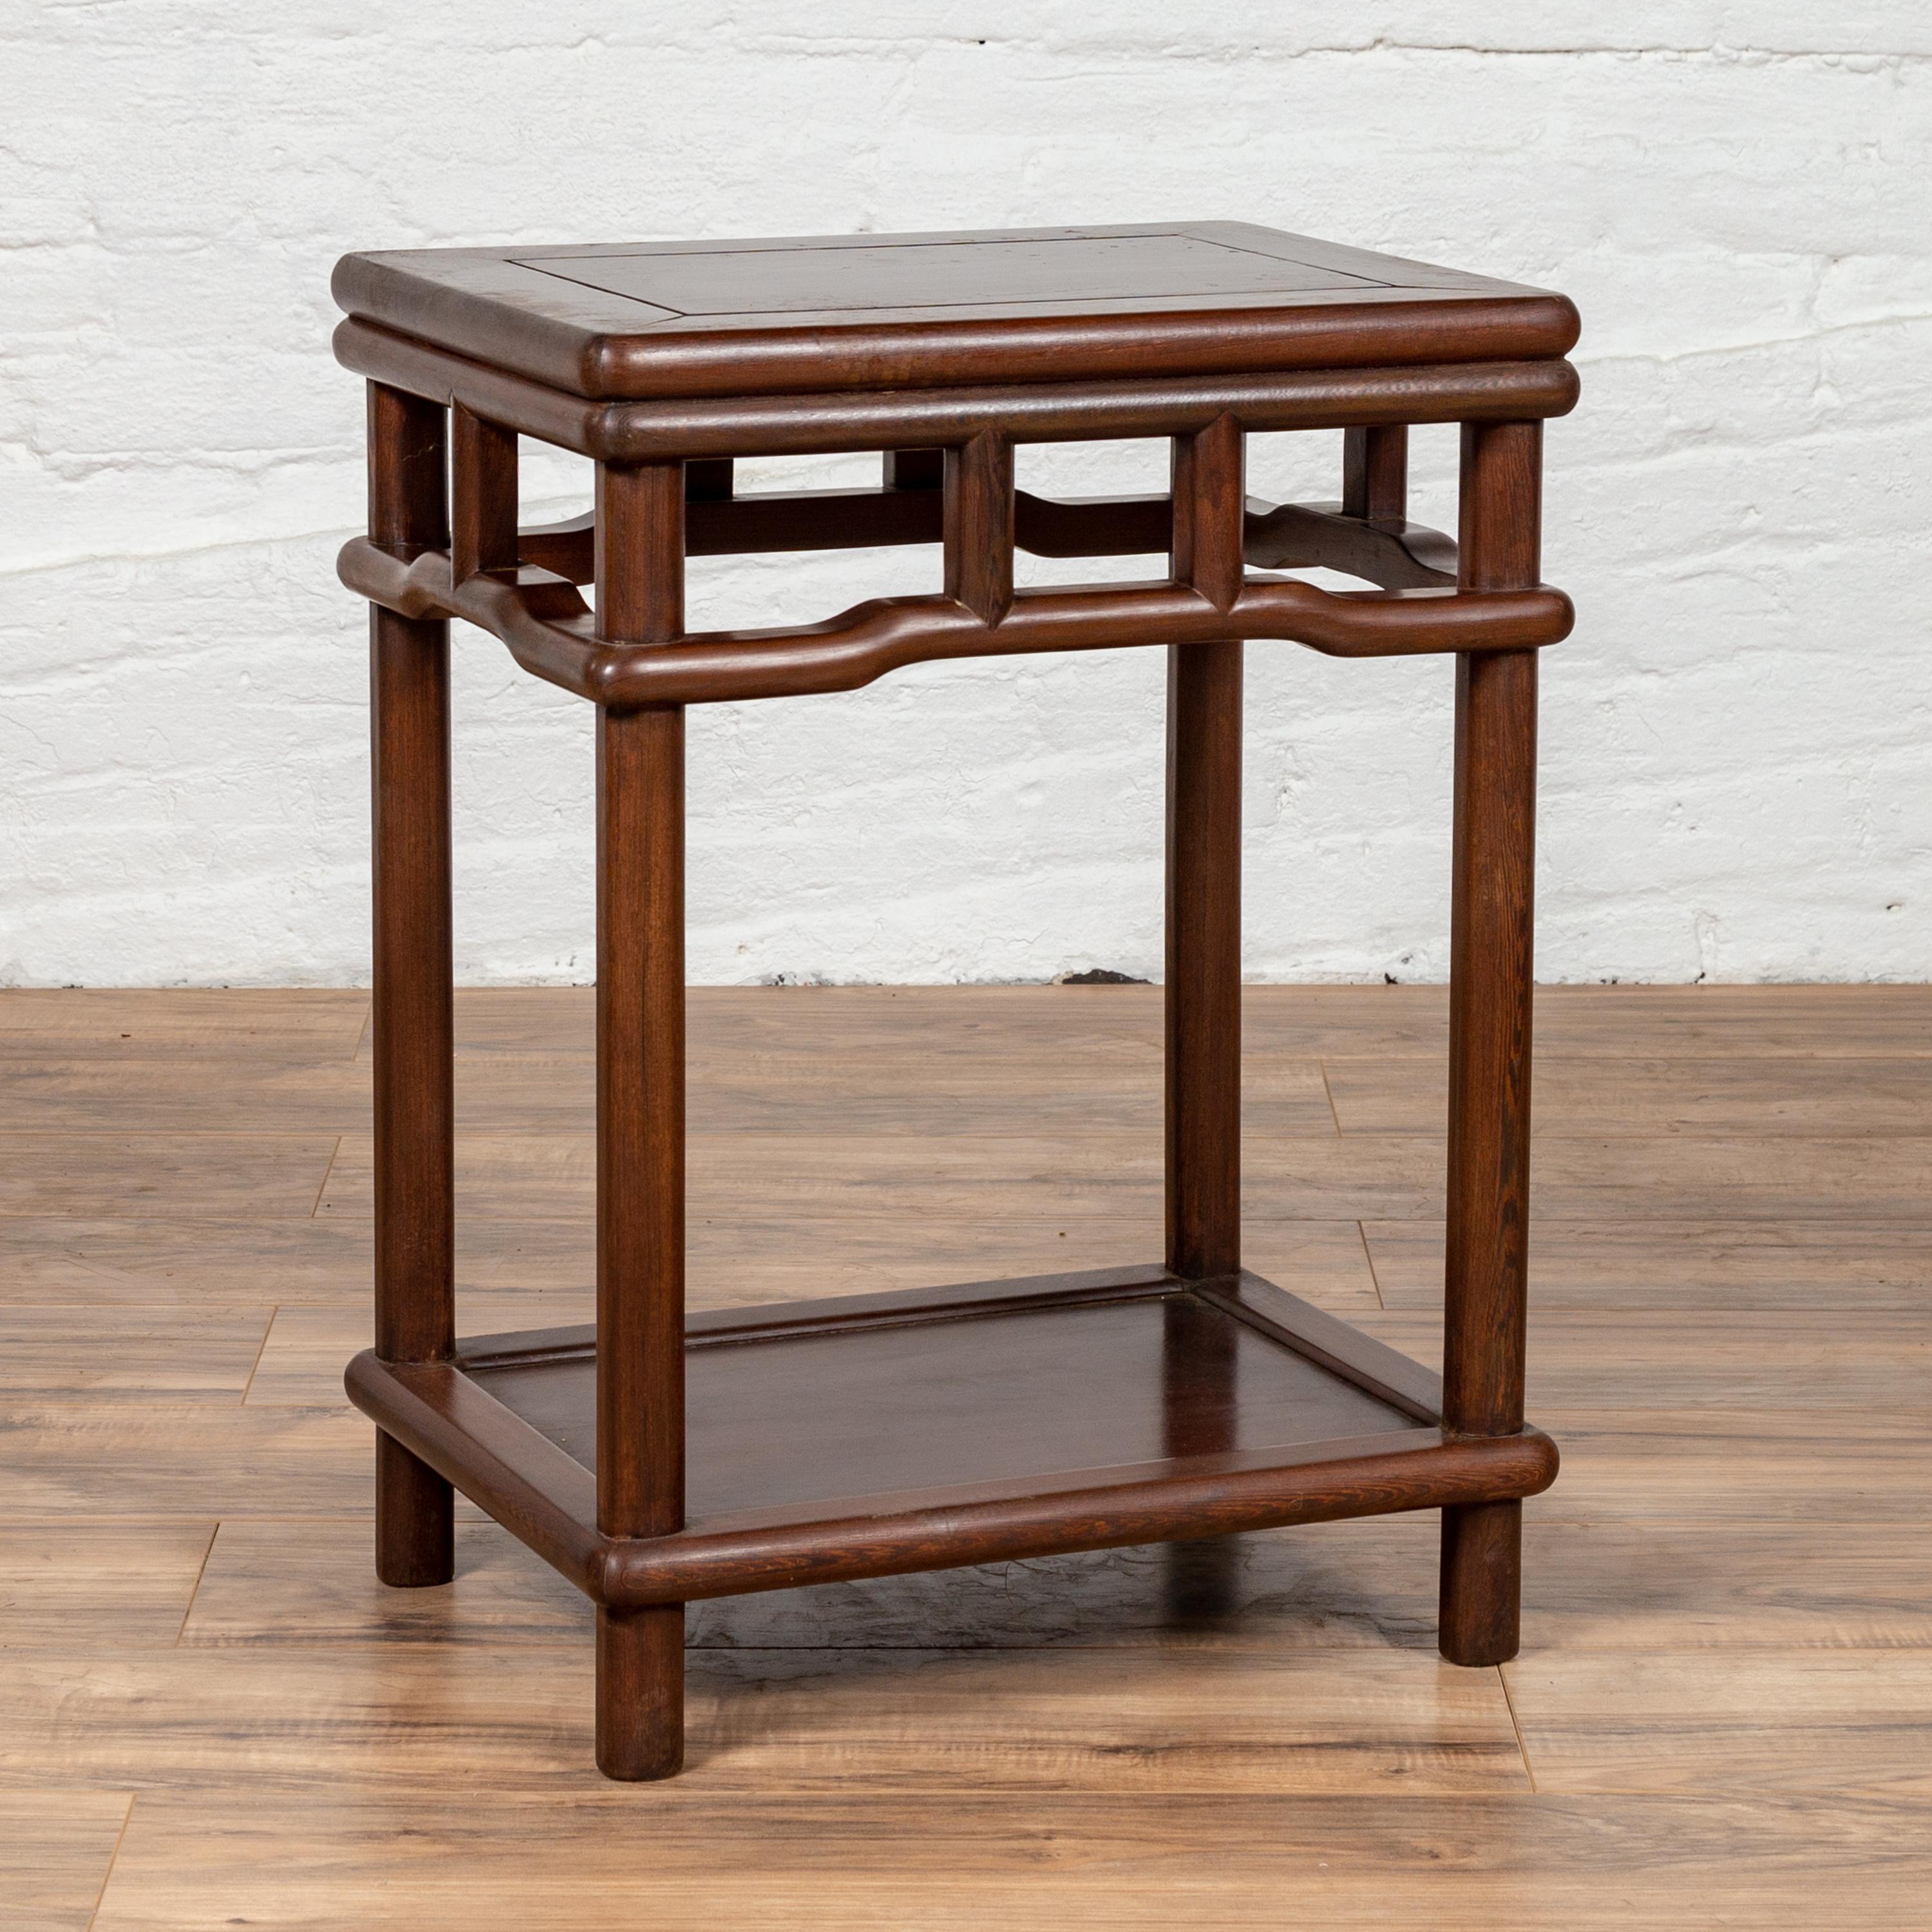 Chinese Ming Style Accent Side Table with Dark Wood Patina and Humpback Apron 2